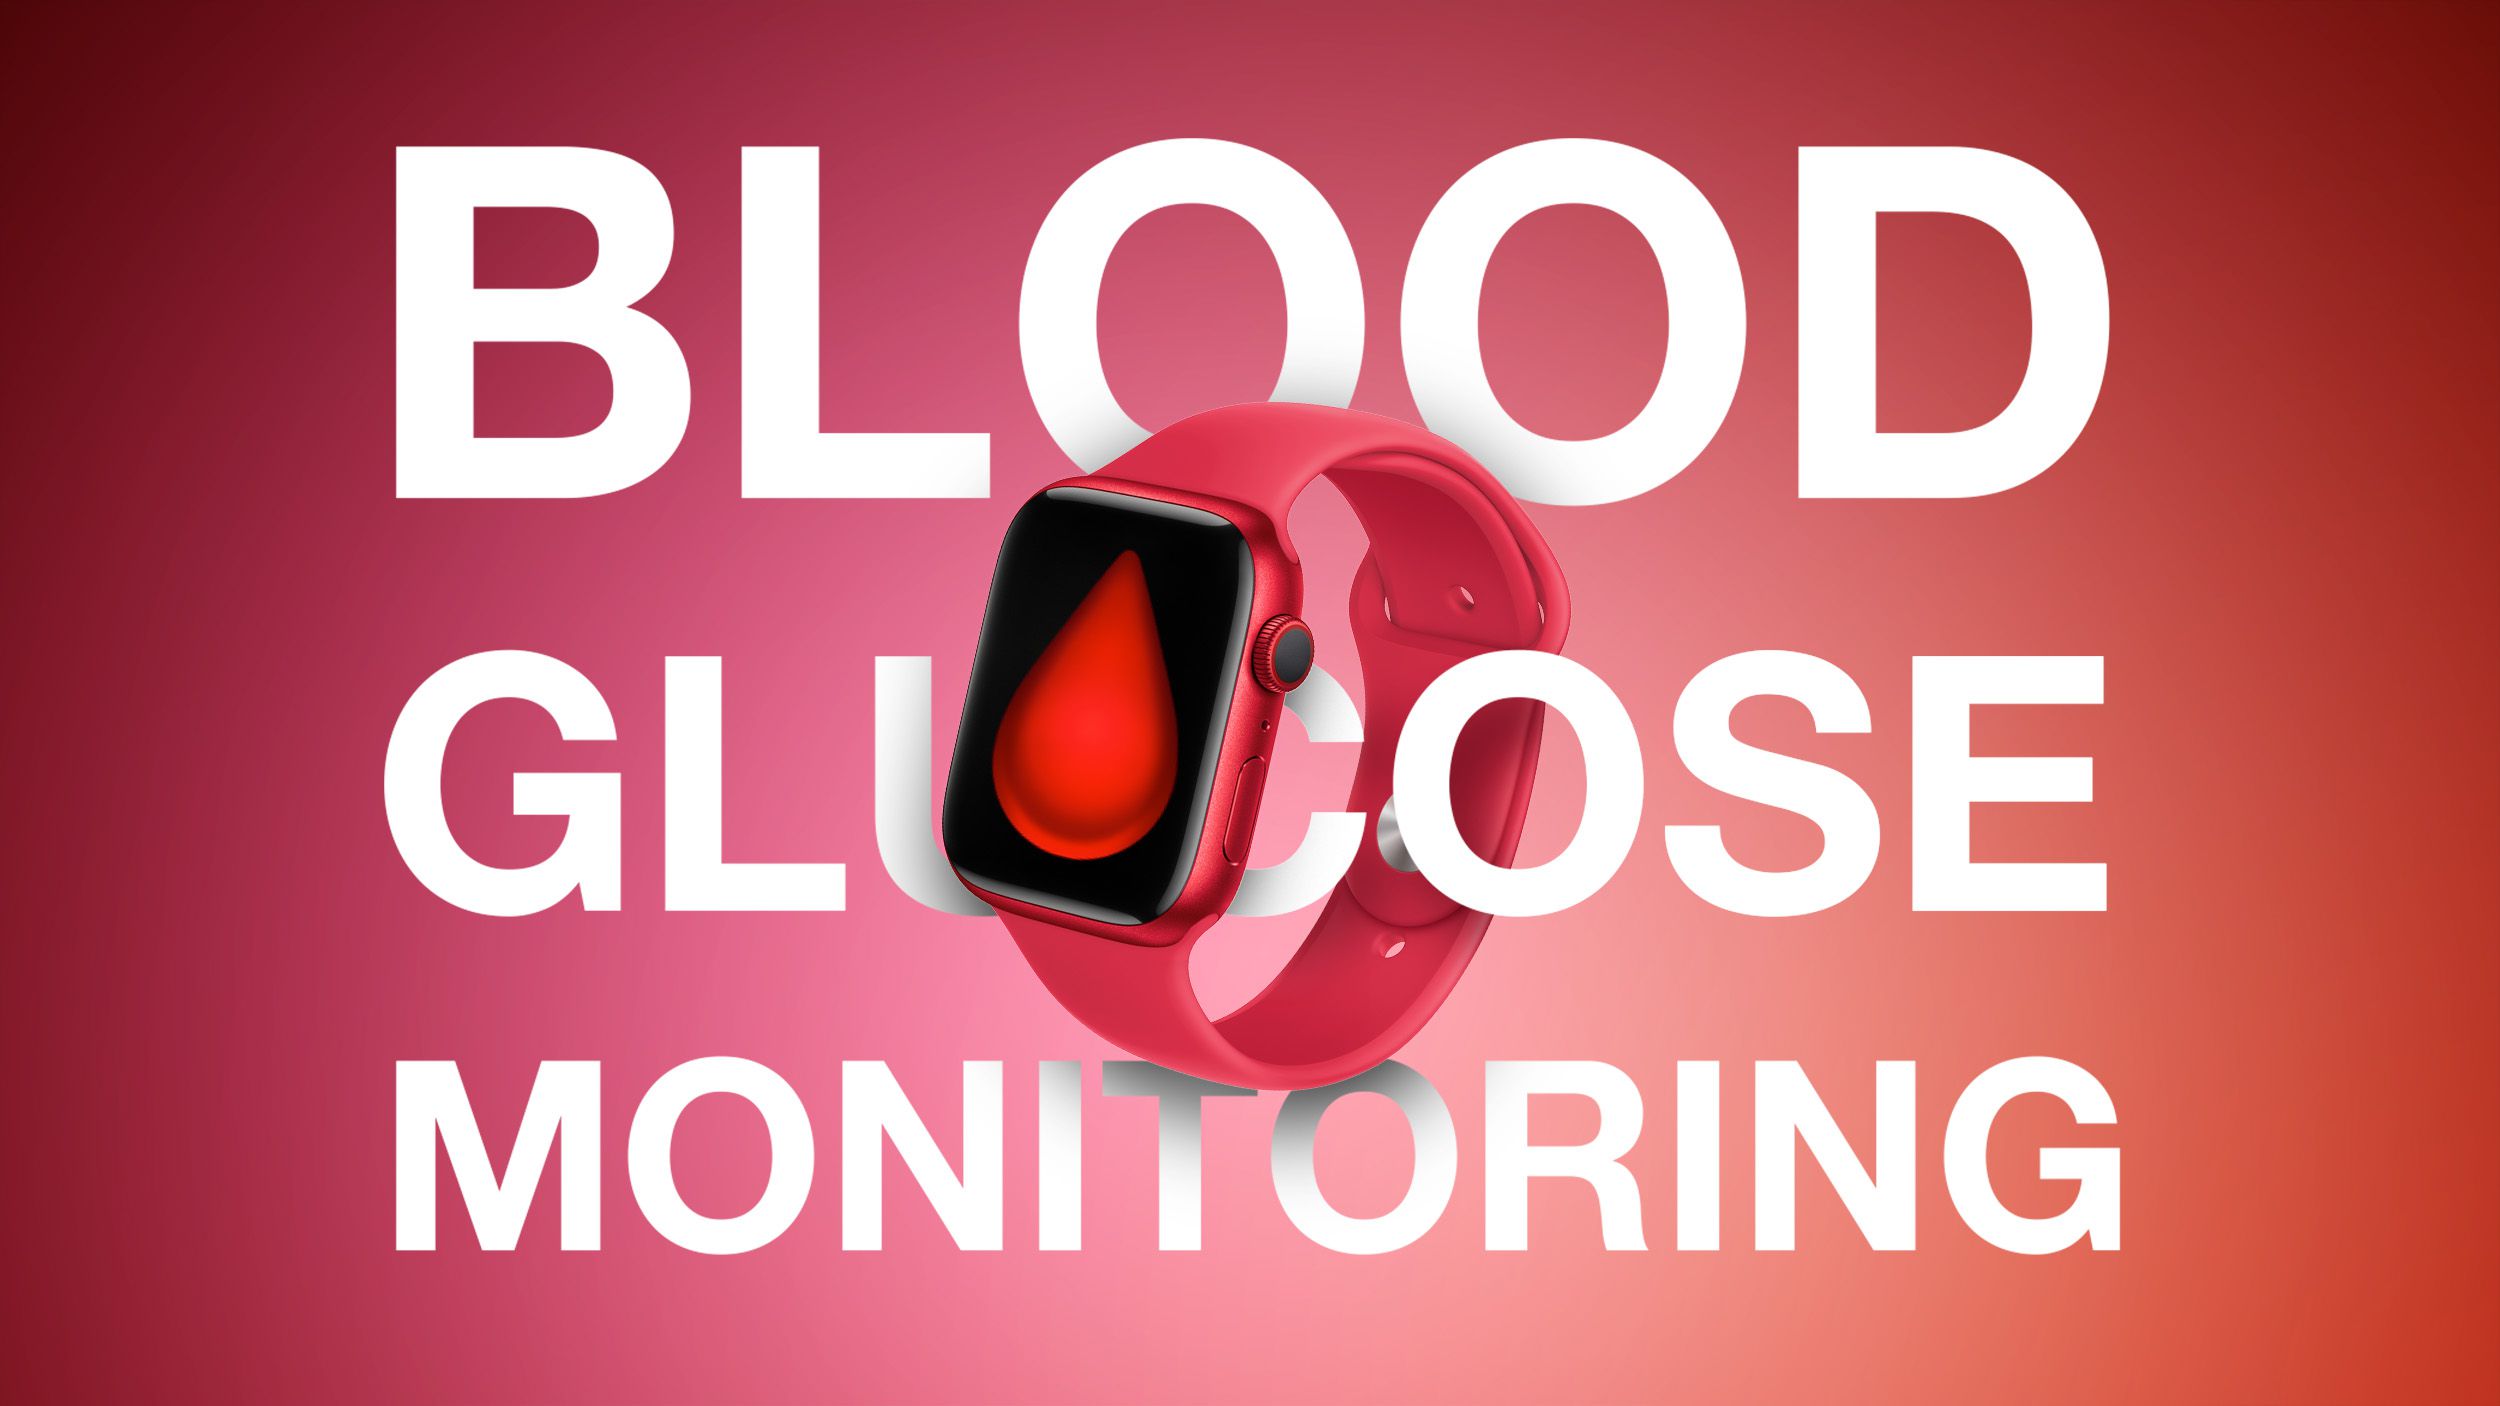 FDA Warns Consumers Not to Use Smart Watches or Rings That Claim to Measure Blood Glucose Levels